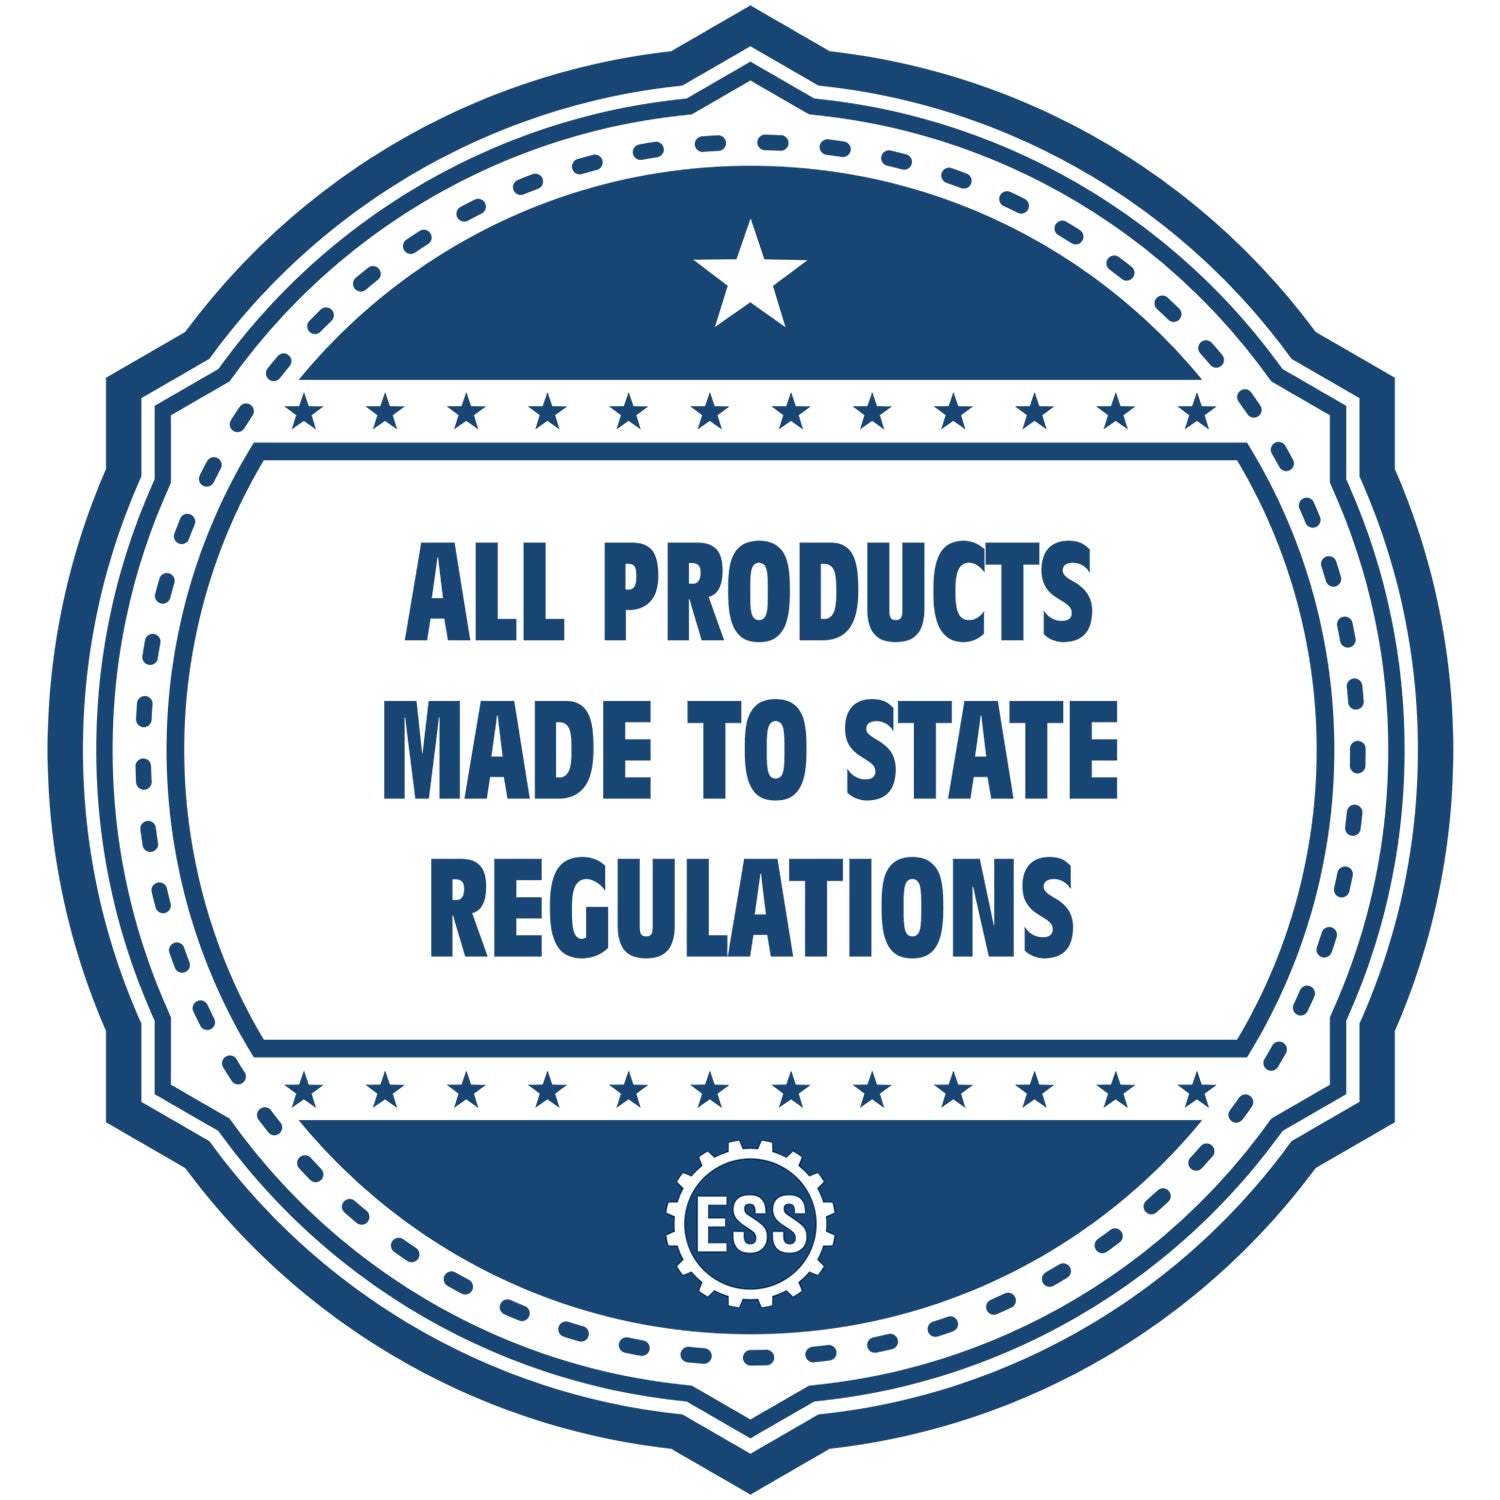 A blue icon or badge for the Gift South Dakota Landscape Architect Seal showing that this product is made in compliance with state regulations.